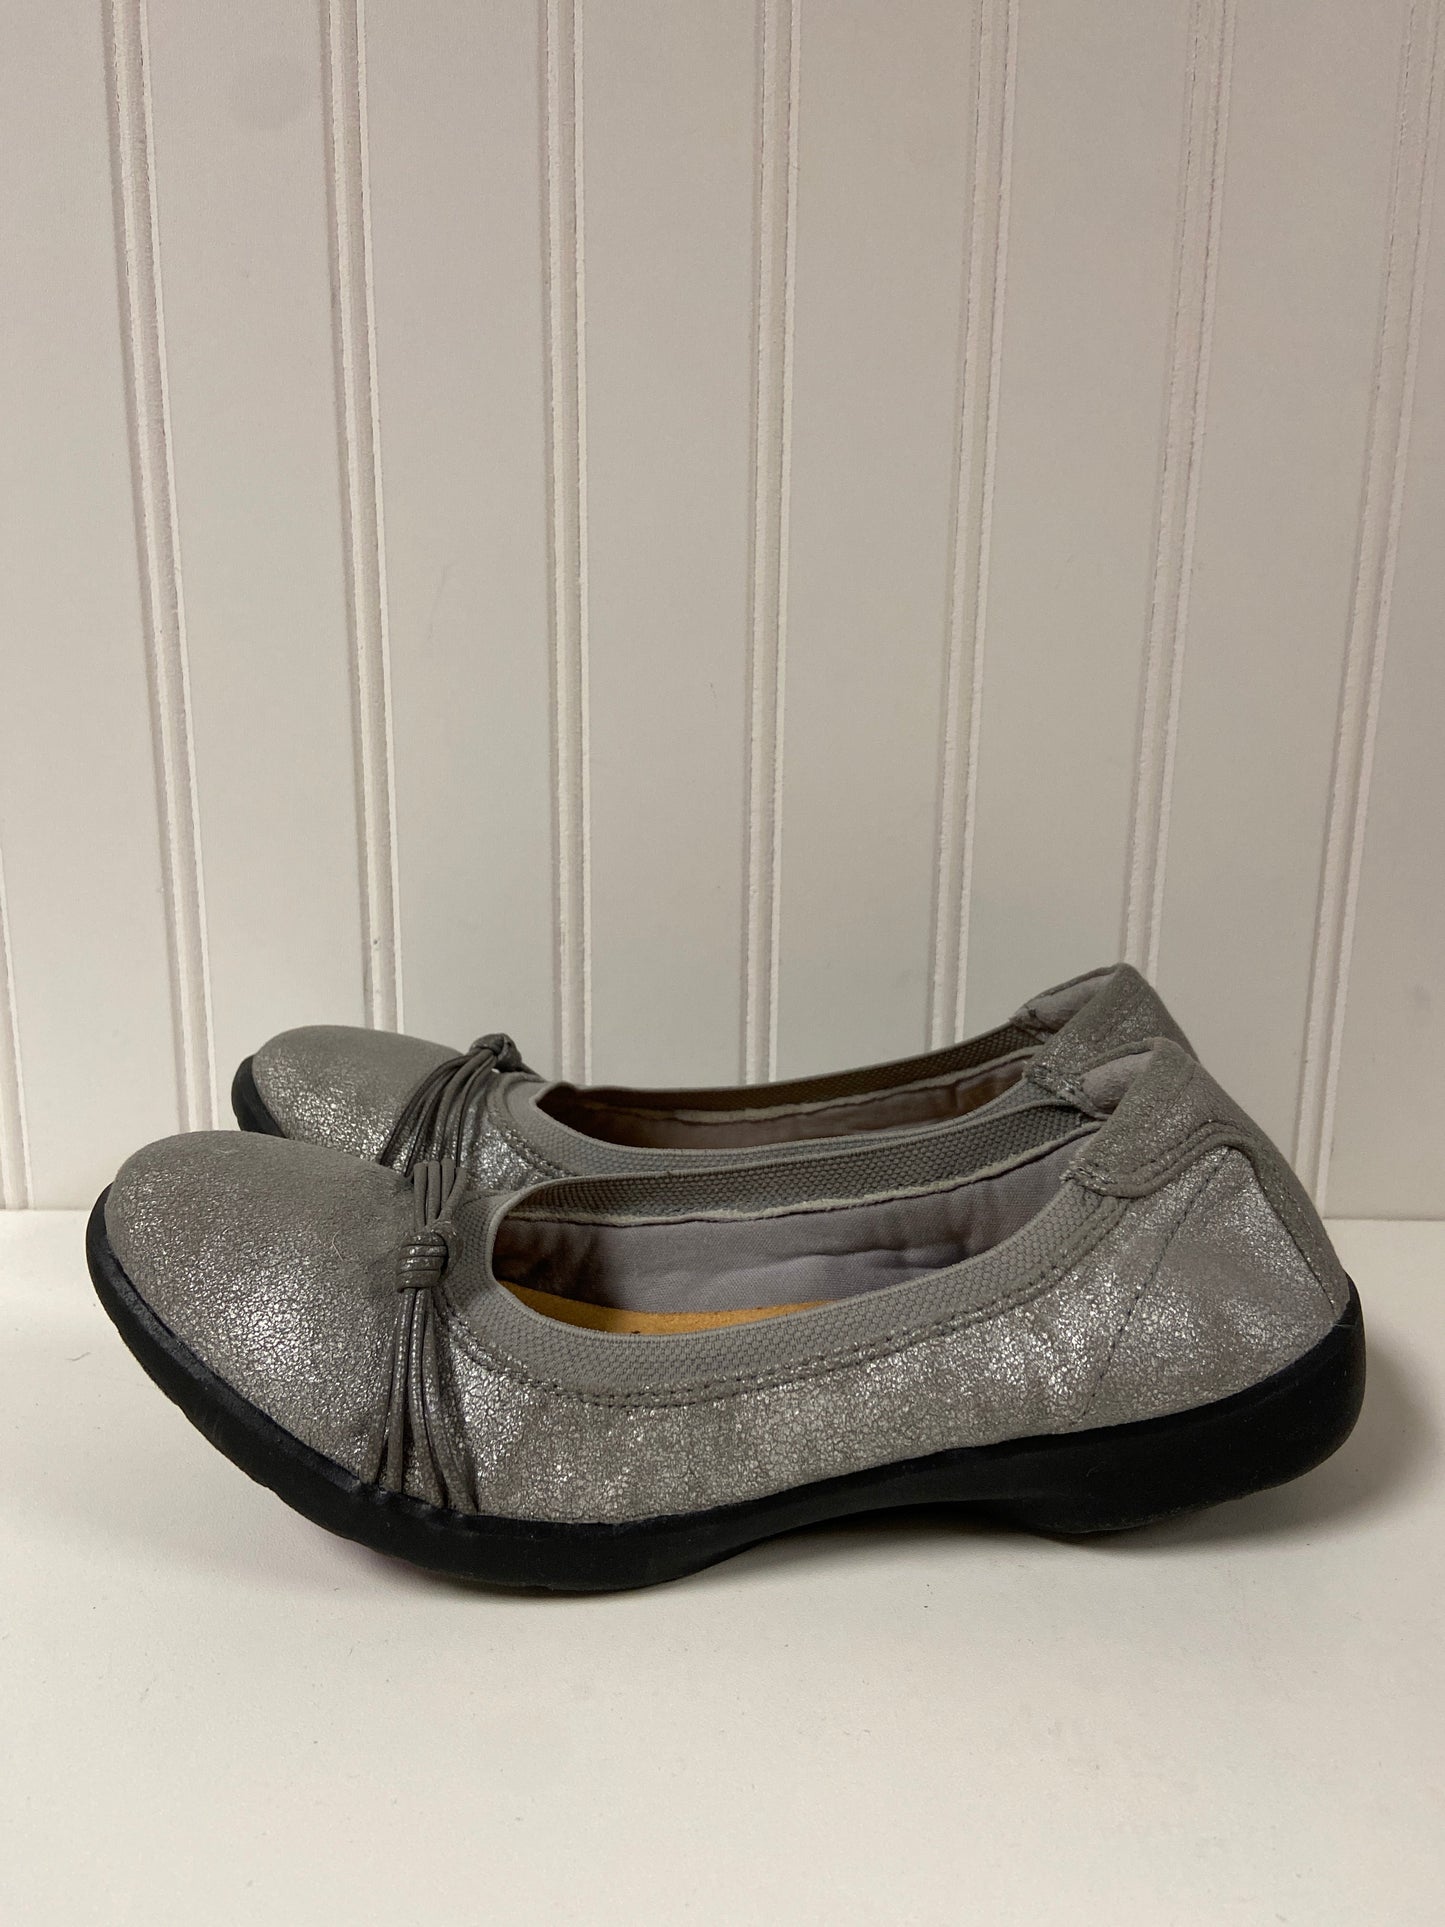 Silver Shoes Flats Clarks, Size 6.5